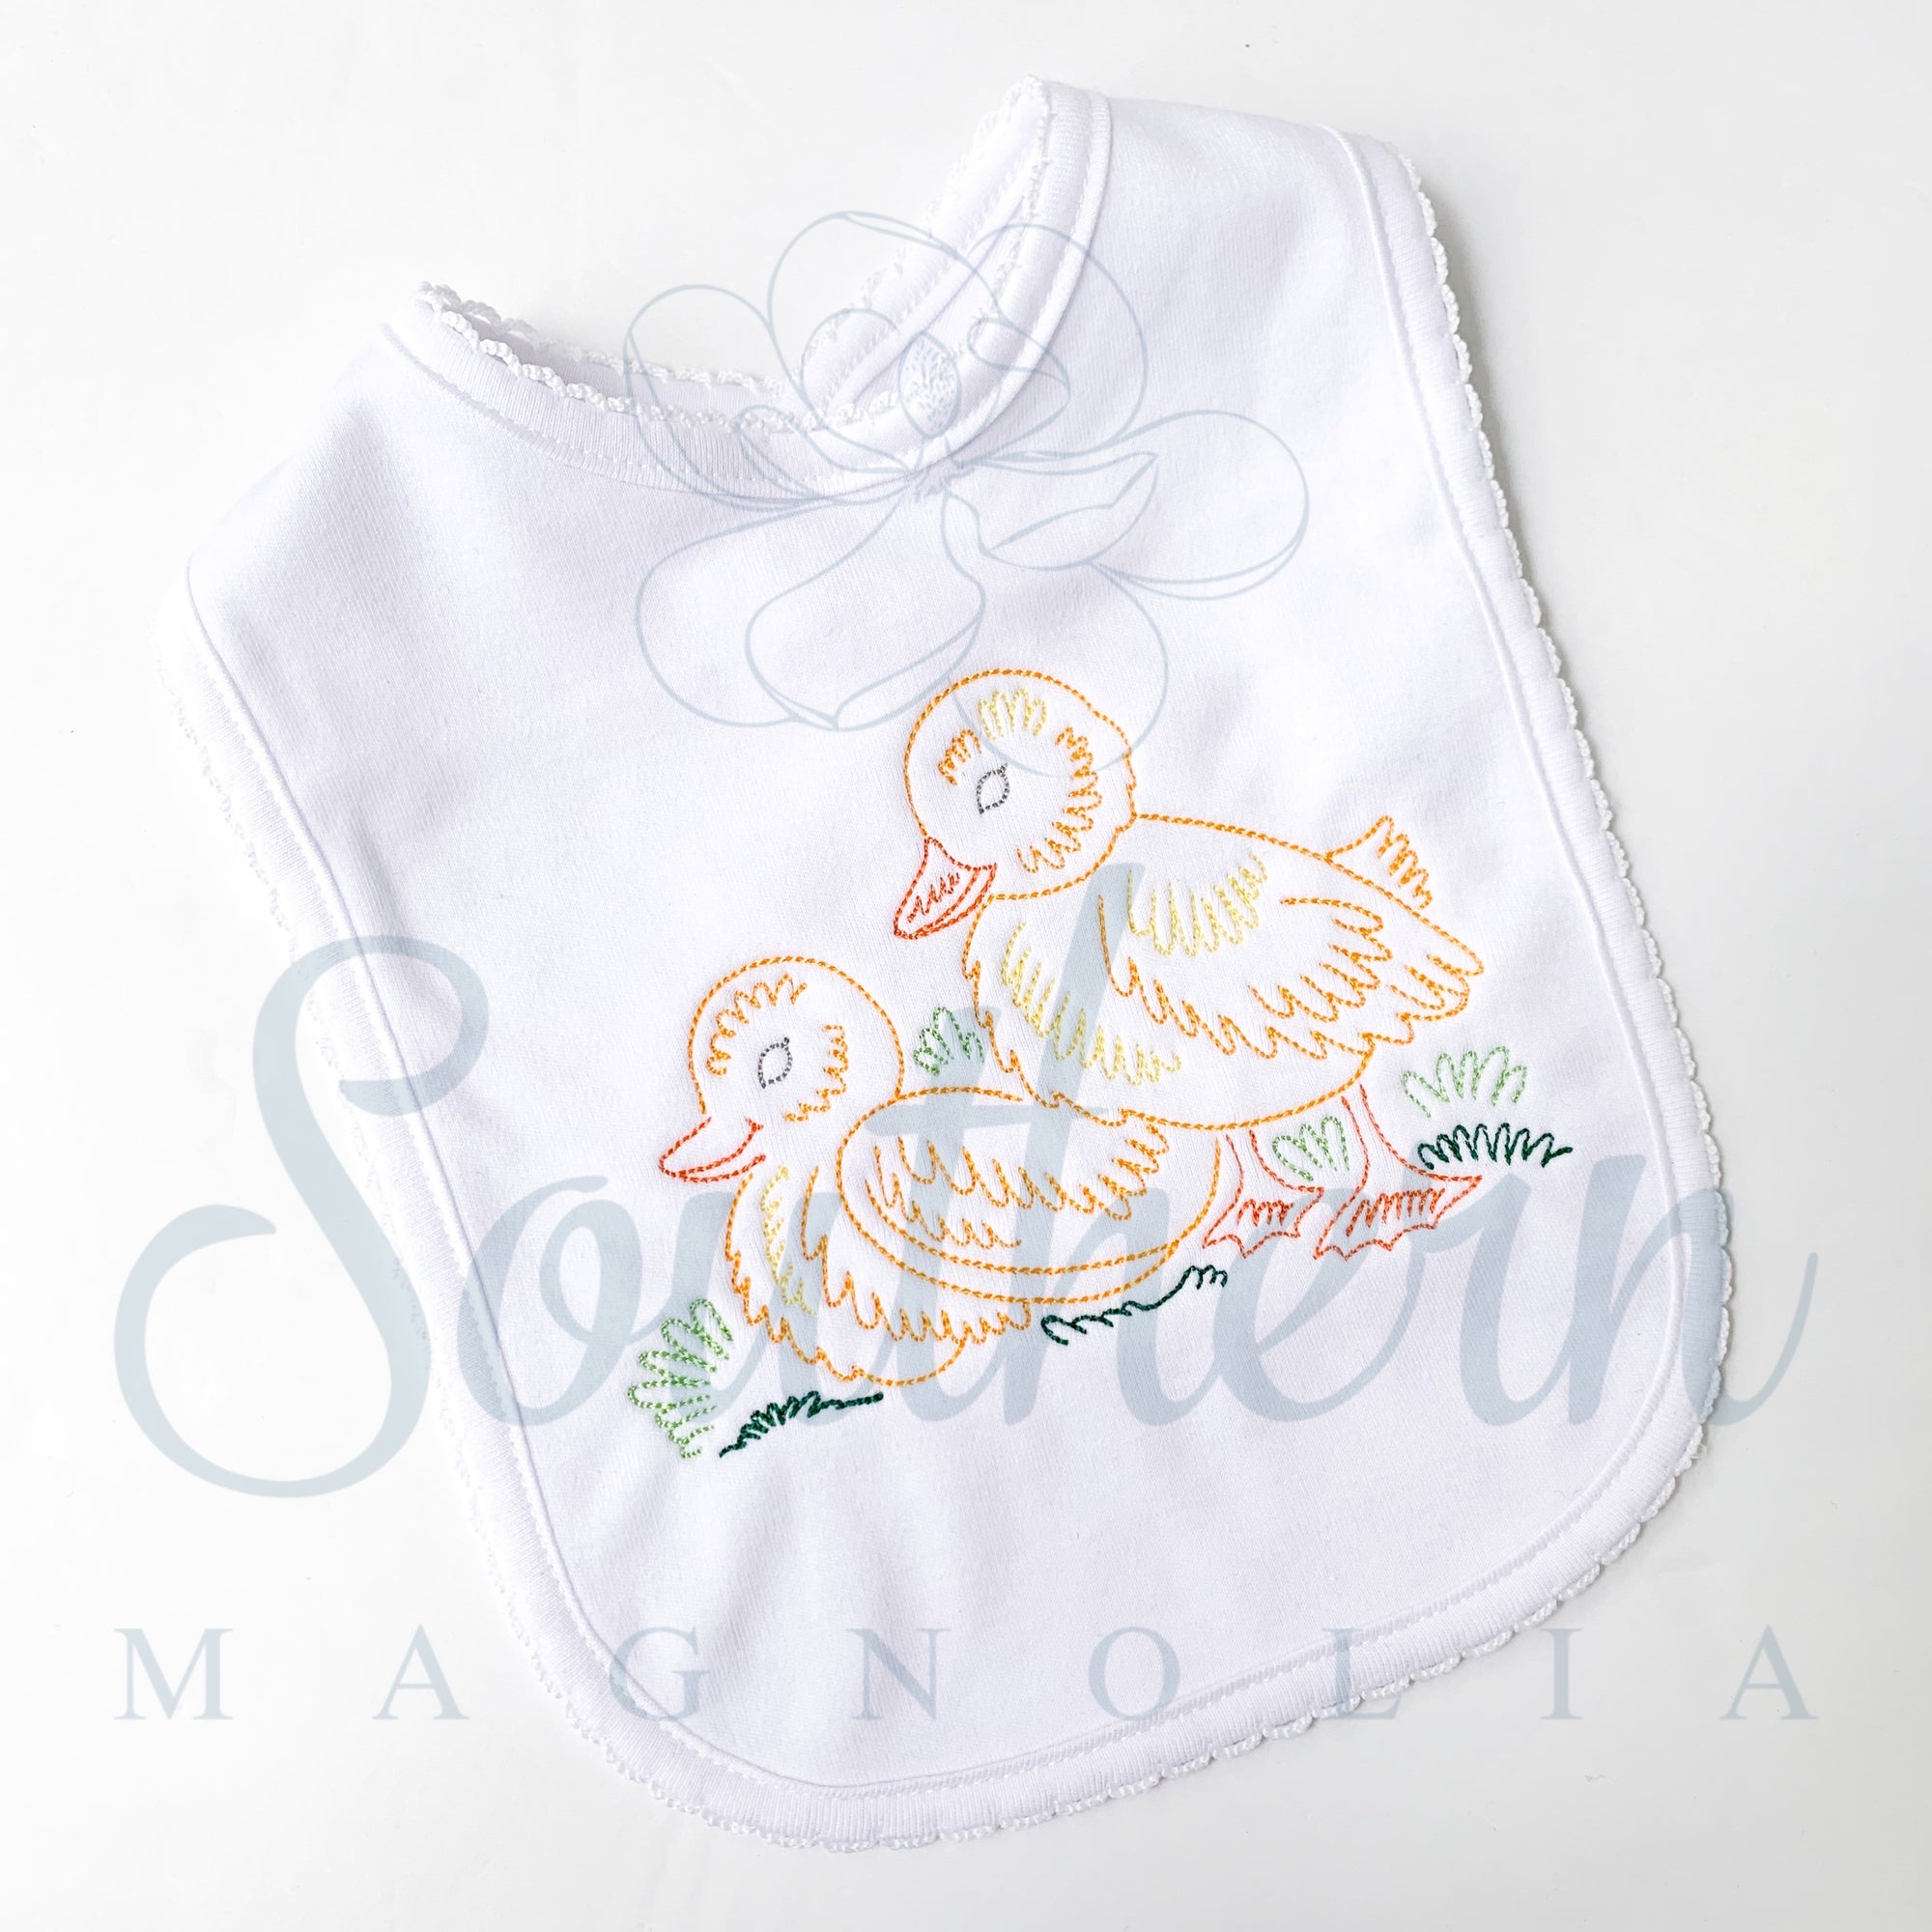 Ducklings Bean Stitch Embroidery Design